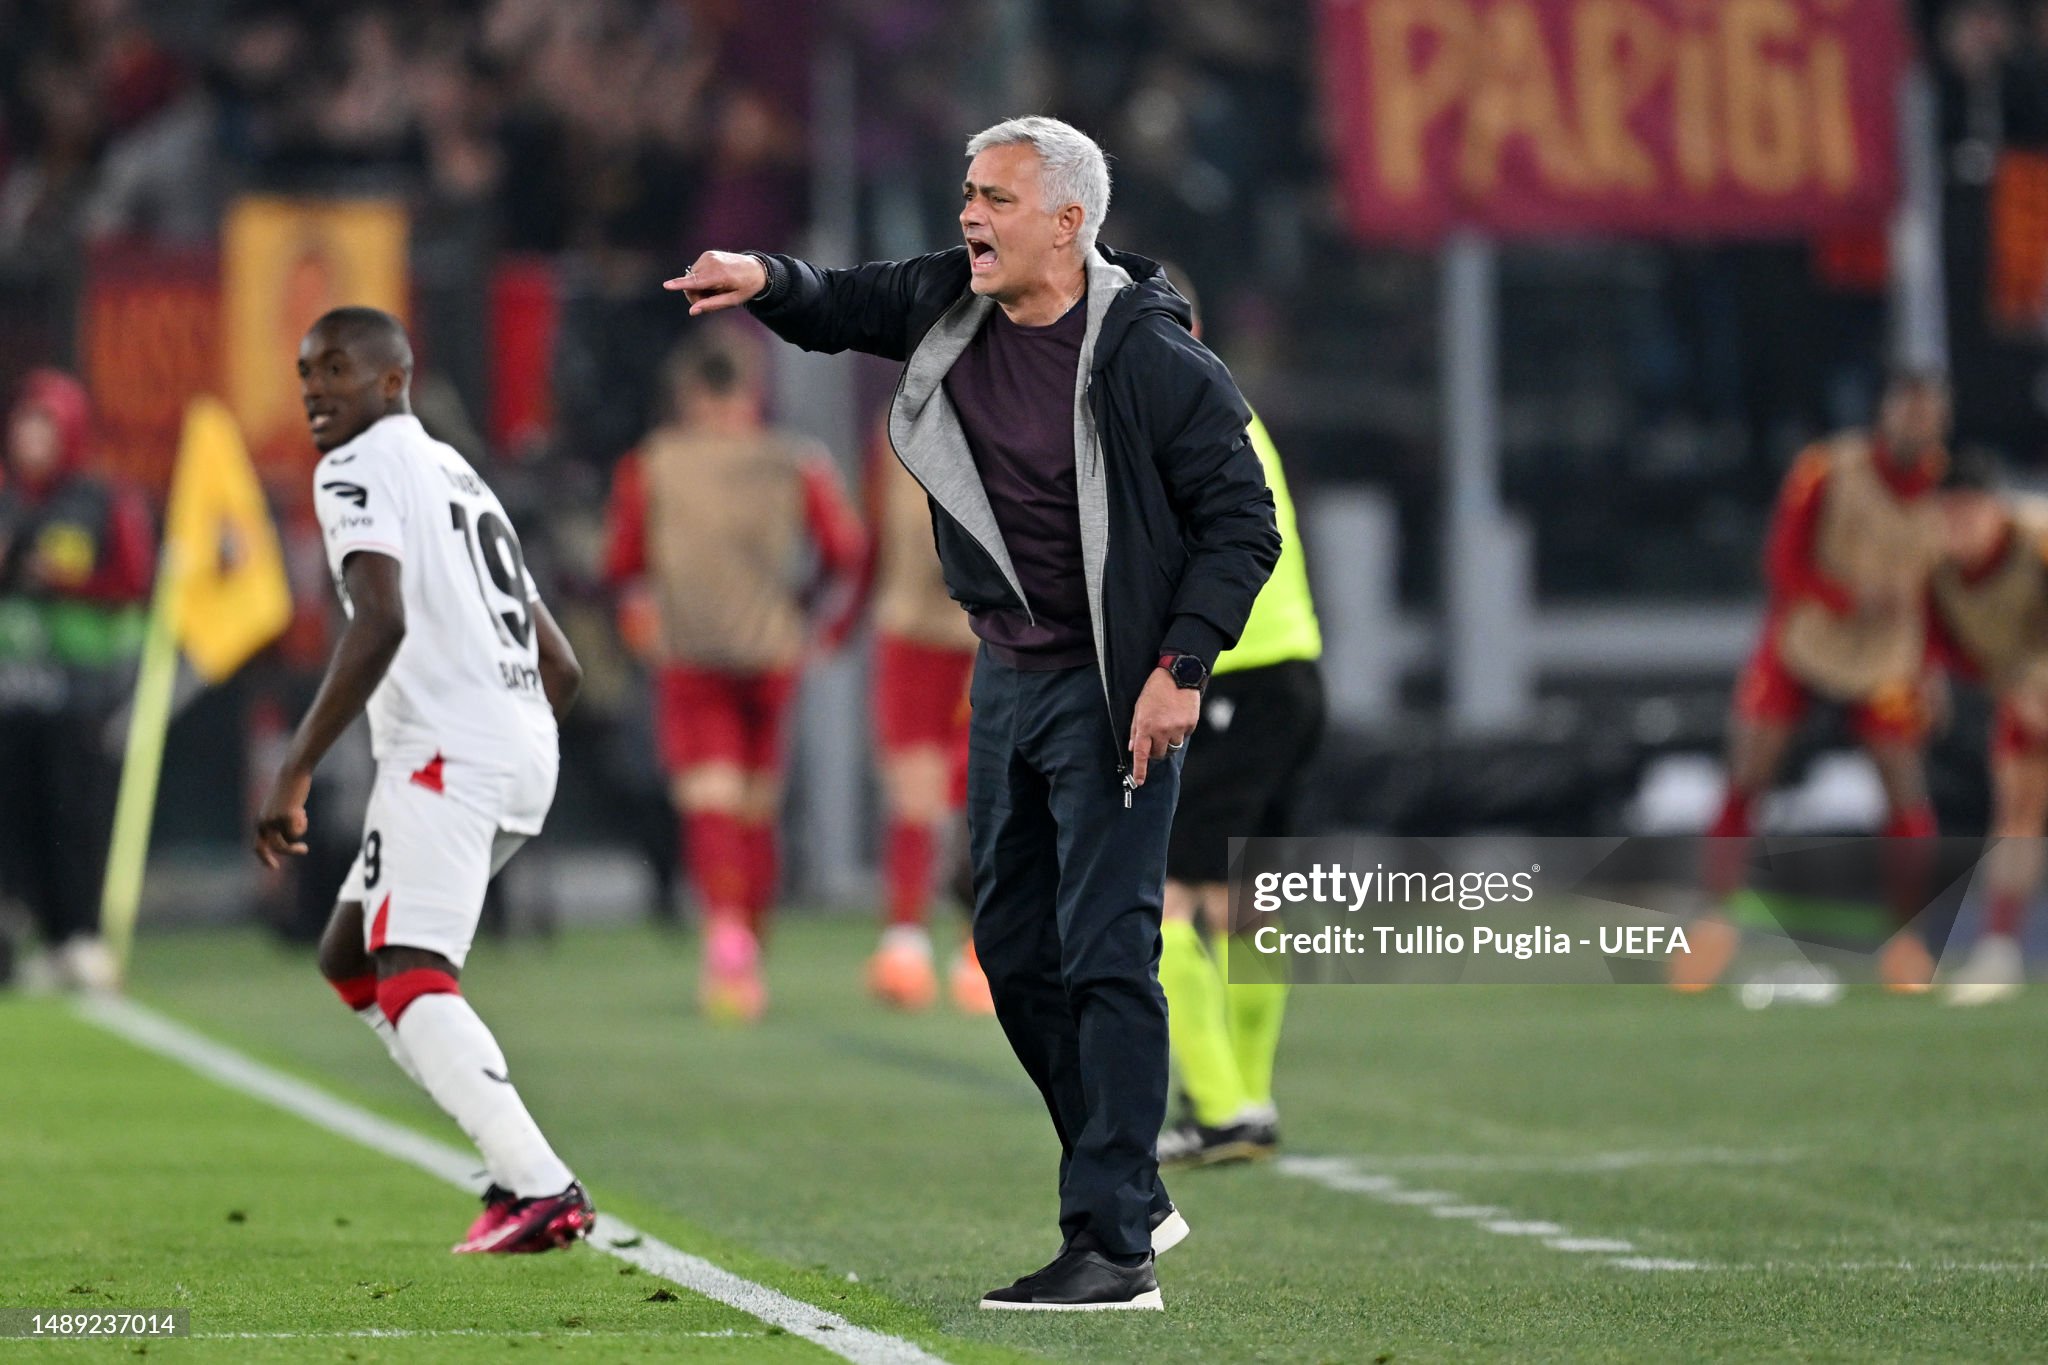 The following magical evening, even The Special One is not left unaffected by AS Roma